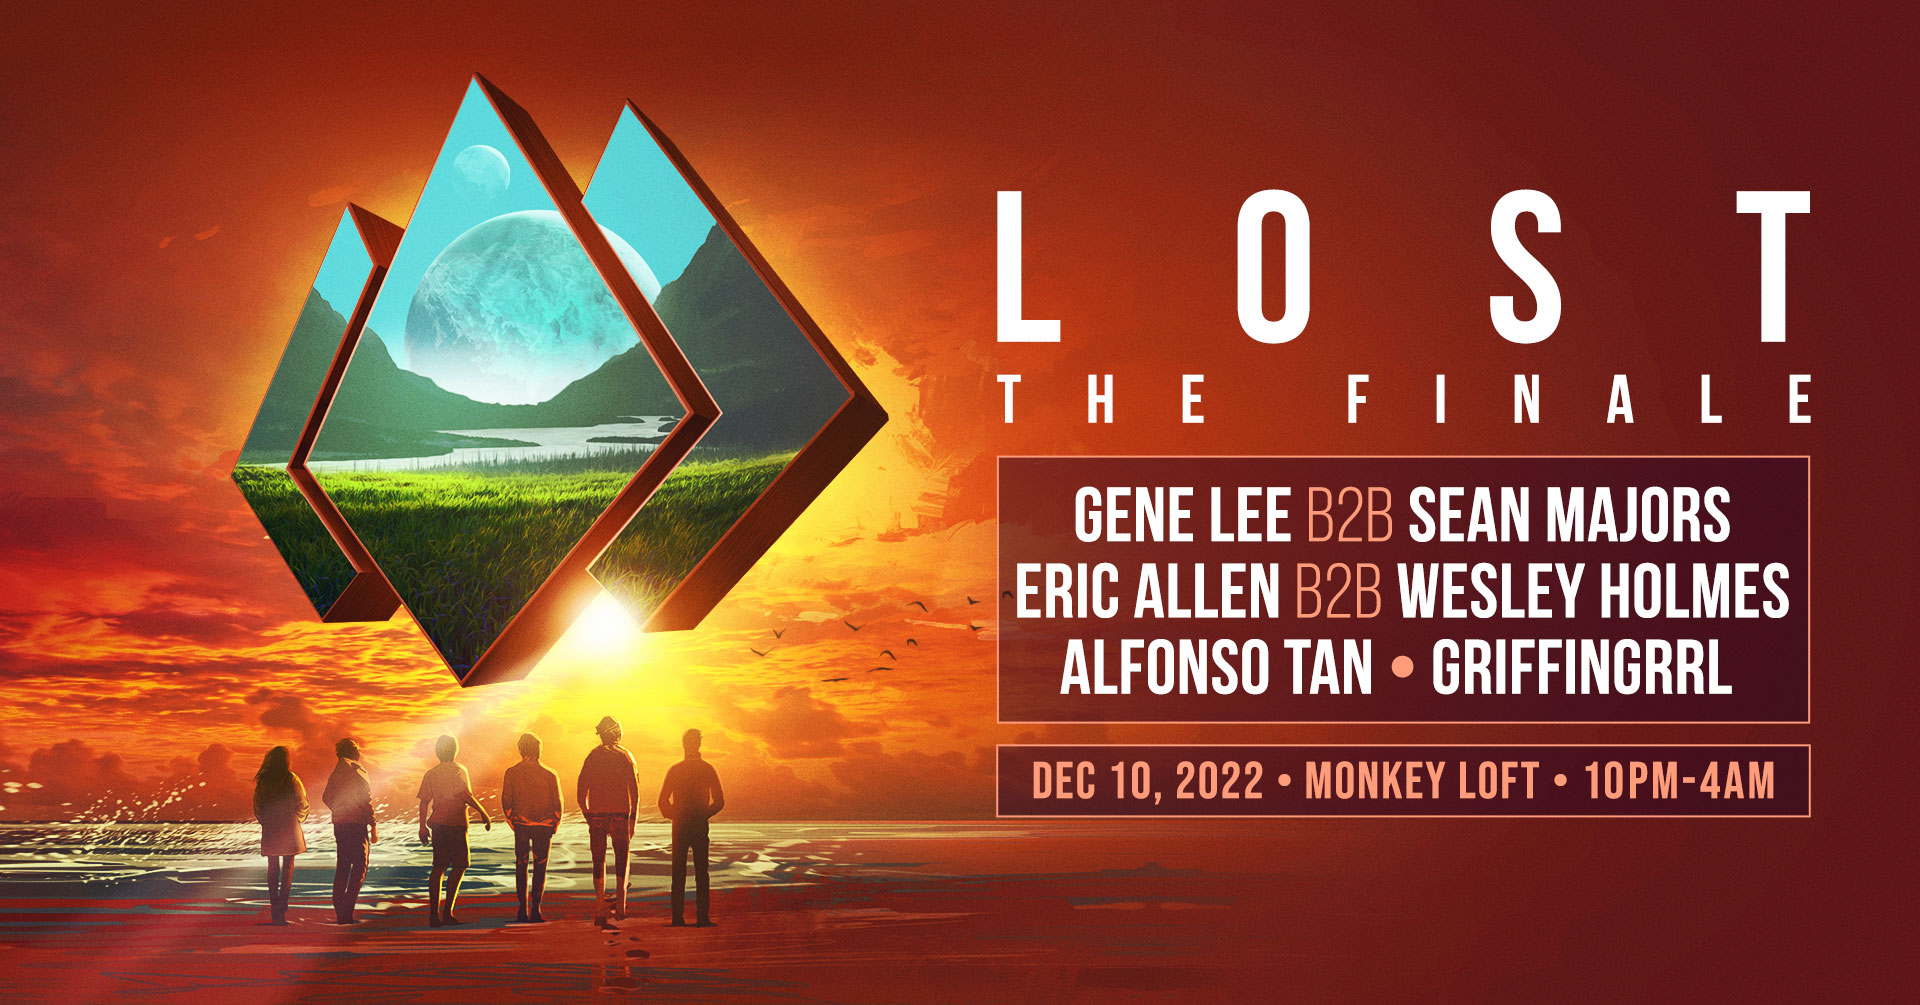 Lost Finale show poster with red and yellow sunset and triangles showing a verdant mountain valley